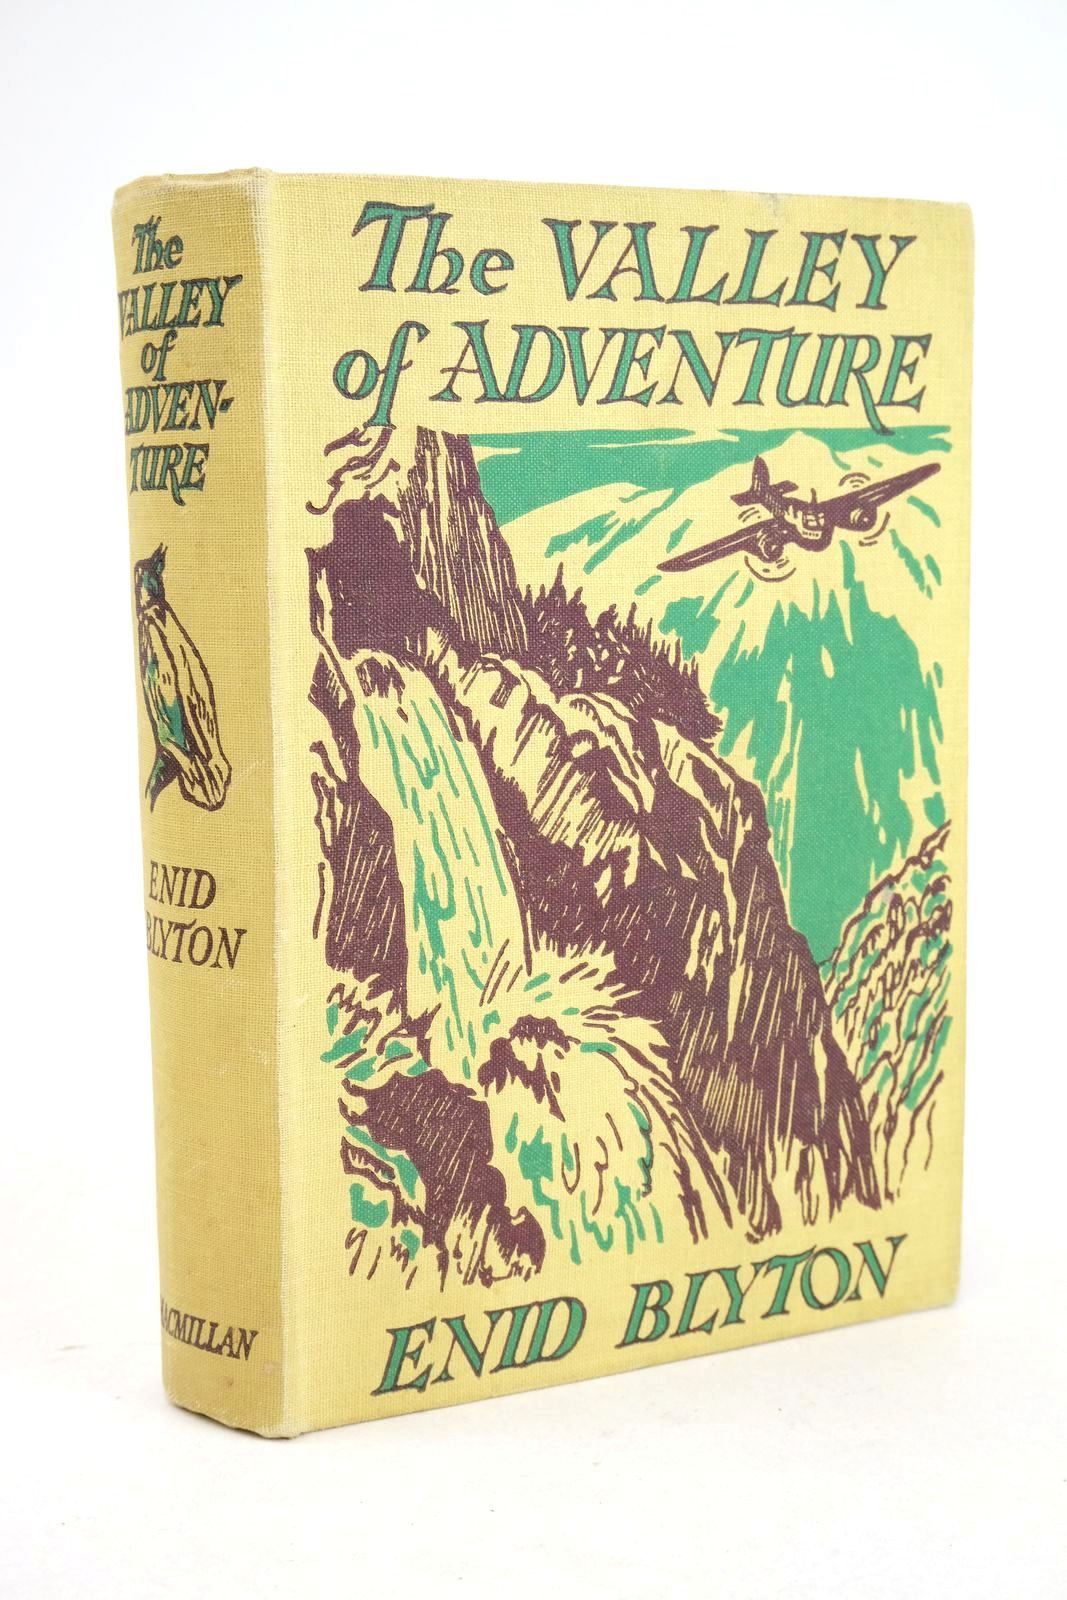 Photo of THE VALLEY OF ADVENTURE written by Blyton, Enid illustrated by Tresilian, Stuart published by Macmillan & Co. Ltd. (STOCK CODE: 1325706)  for sale by Stella & Rose's Books